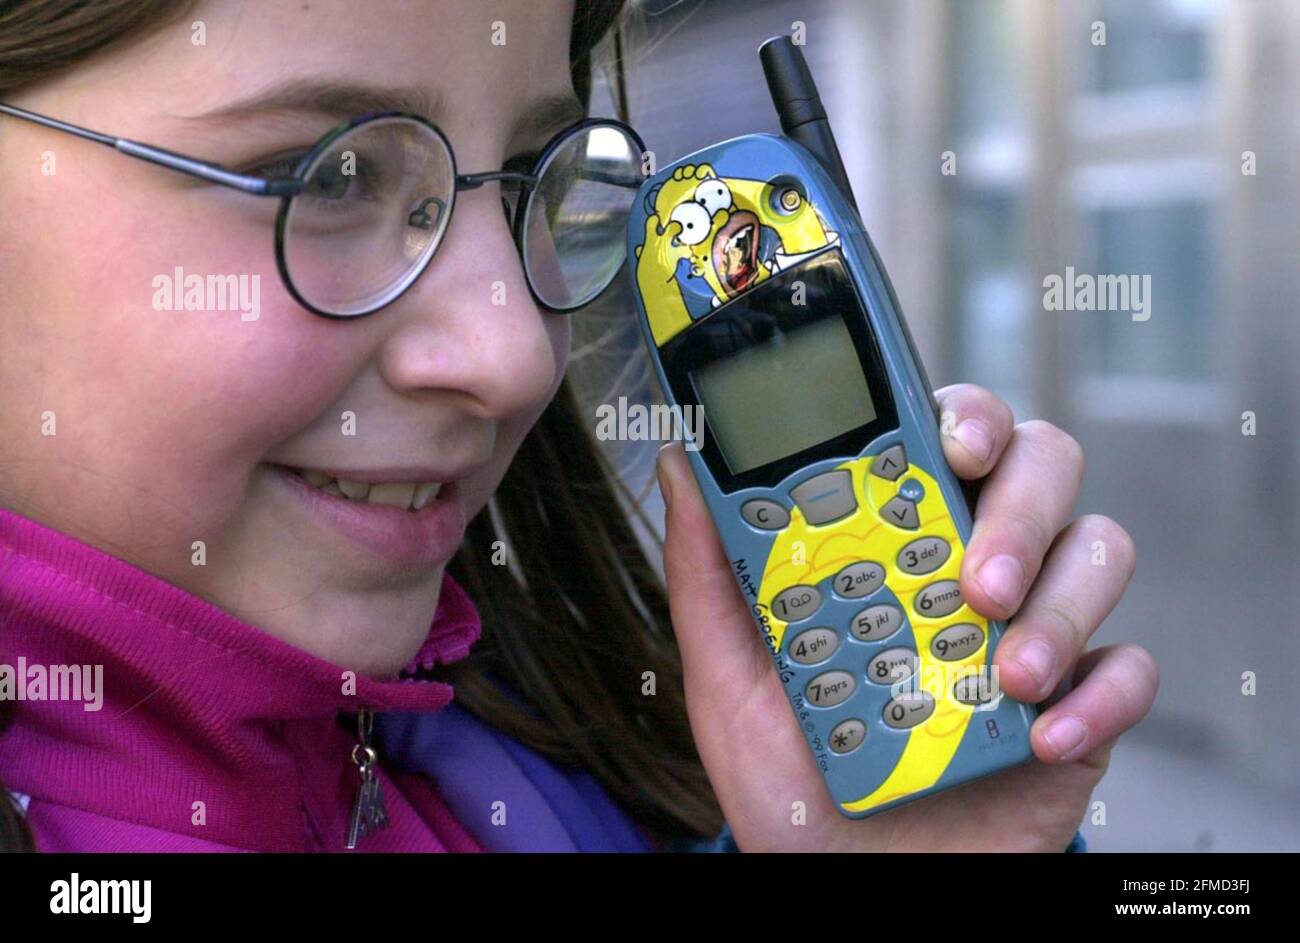 Zoya Giammetta, age 8, December 2000 with a Homer Simpson Nokia mobile phone.  (note: she is posing with the phone, and does not own one herself) Stock Photo